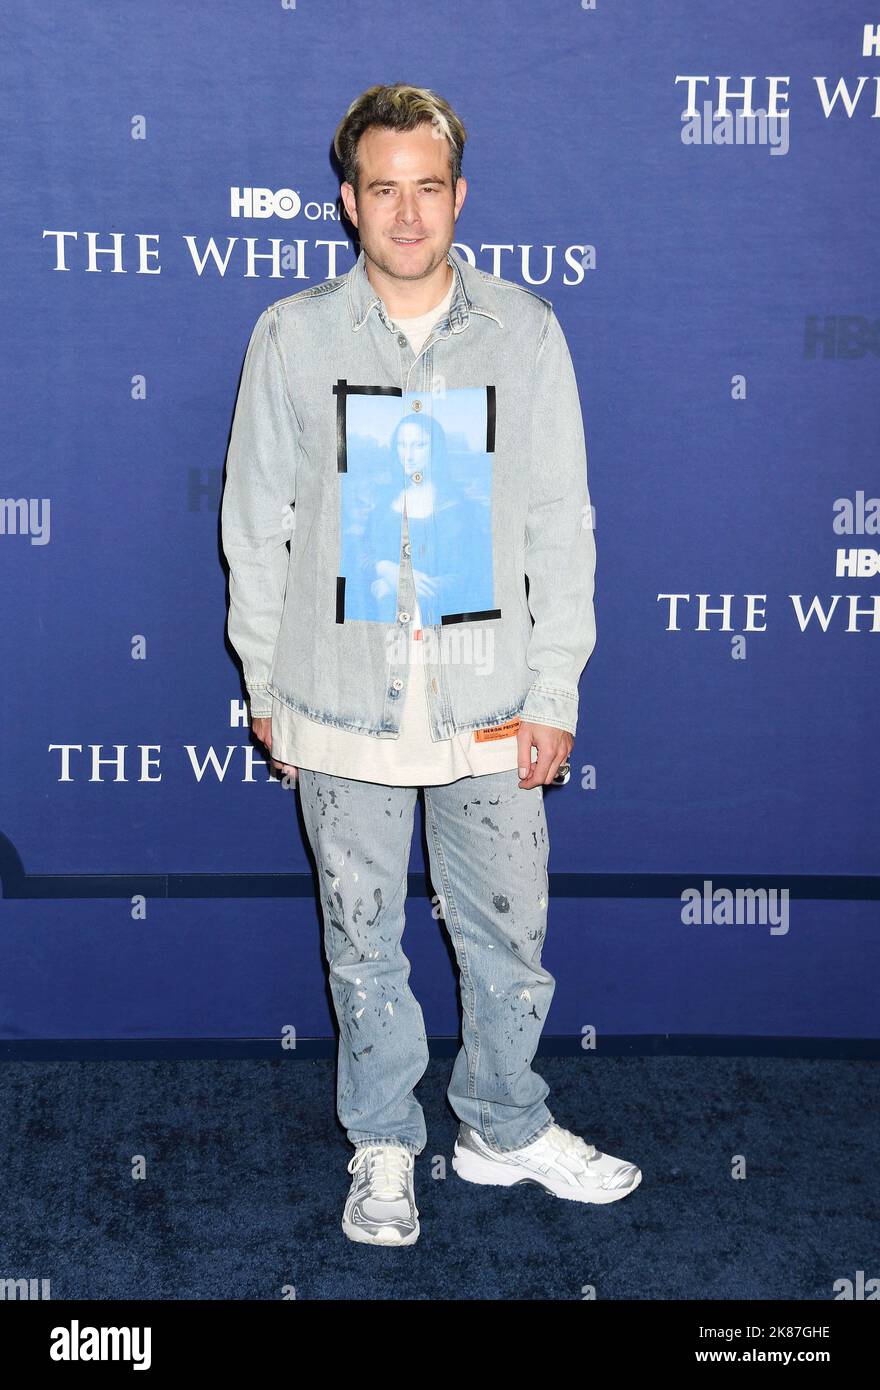 Los Angeles, USA. 20th Oct, 2022. Max Borenstein attends the Los Angeles Season 2 Premiere of HBO Original Series 'The White Lotus' at Goya Studios on October 20, 2022 in Los Angeles, California. Credit: Jeffrey Mayer/Jtm Photos/Media Punch/Alamy Live News Stock Photo